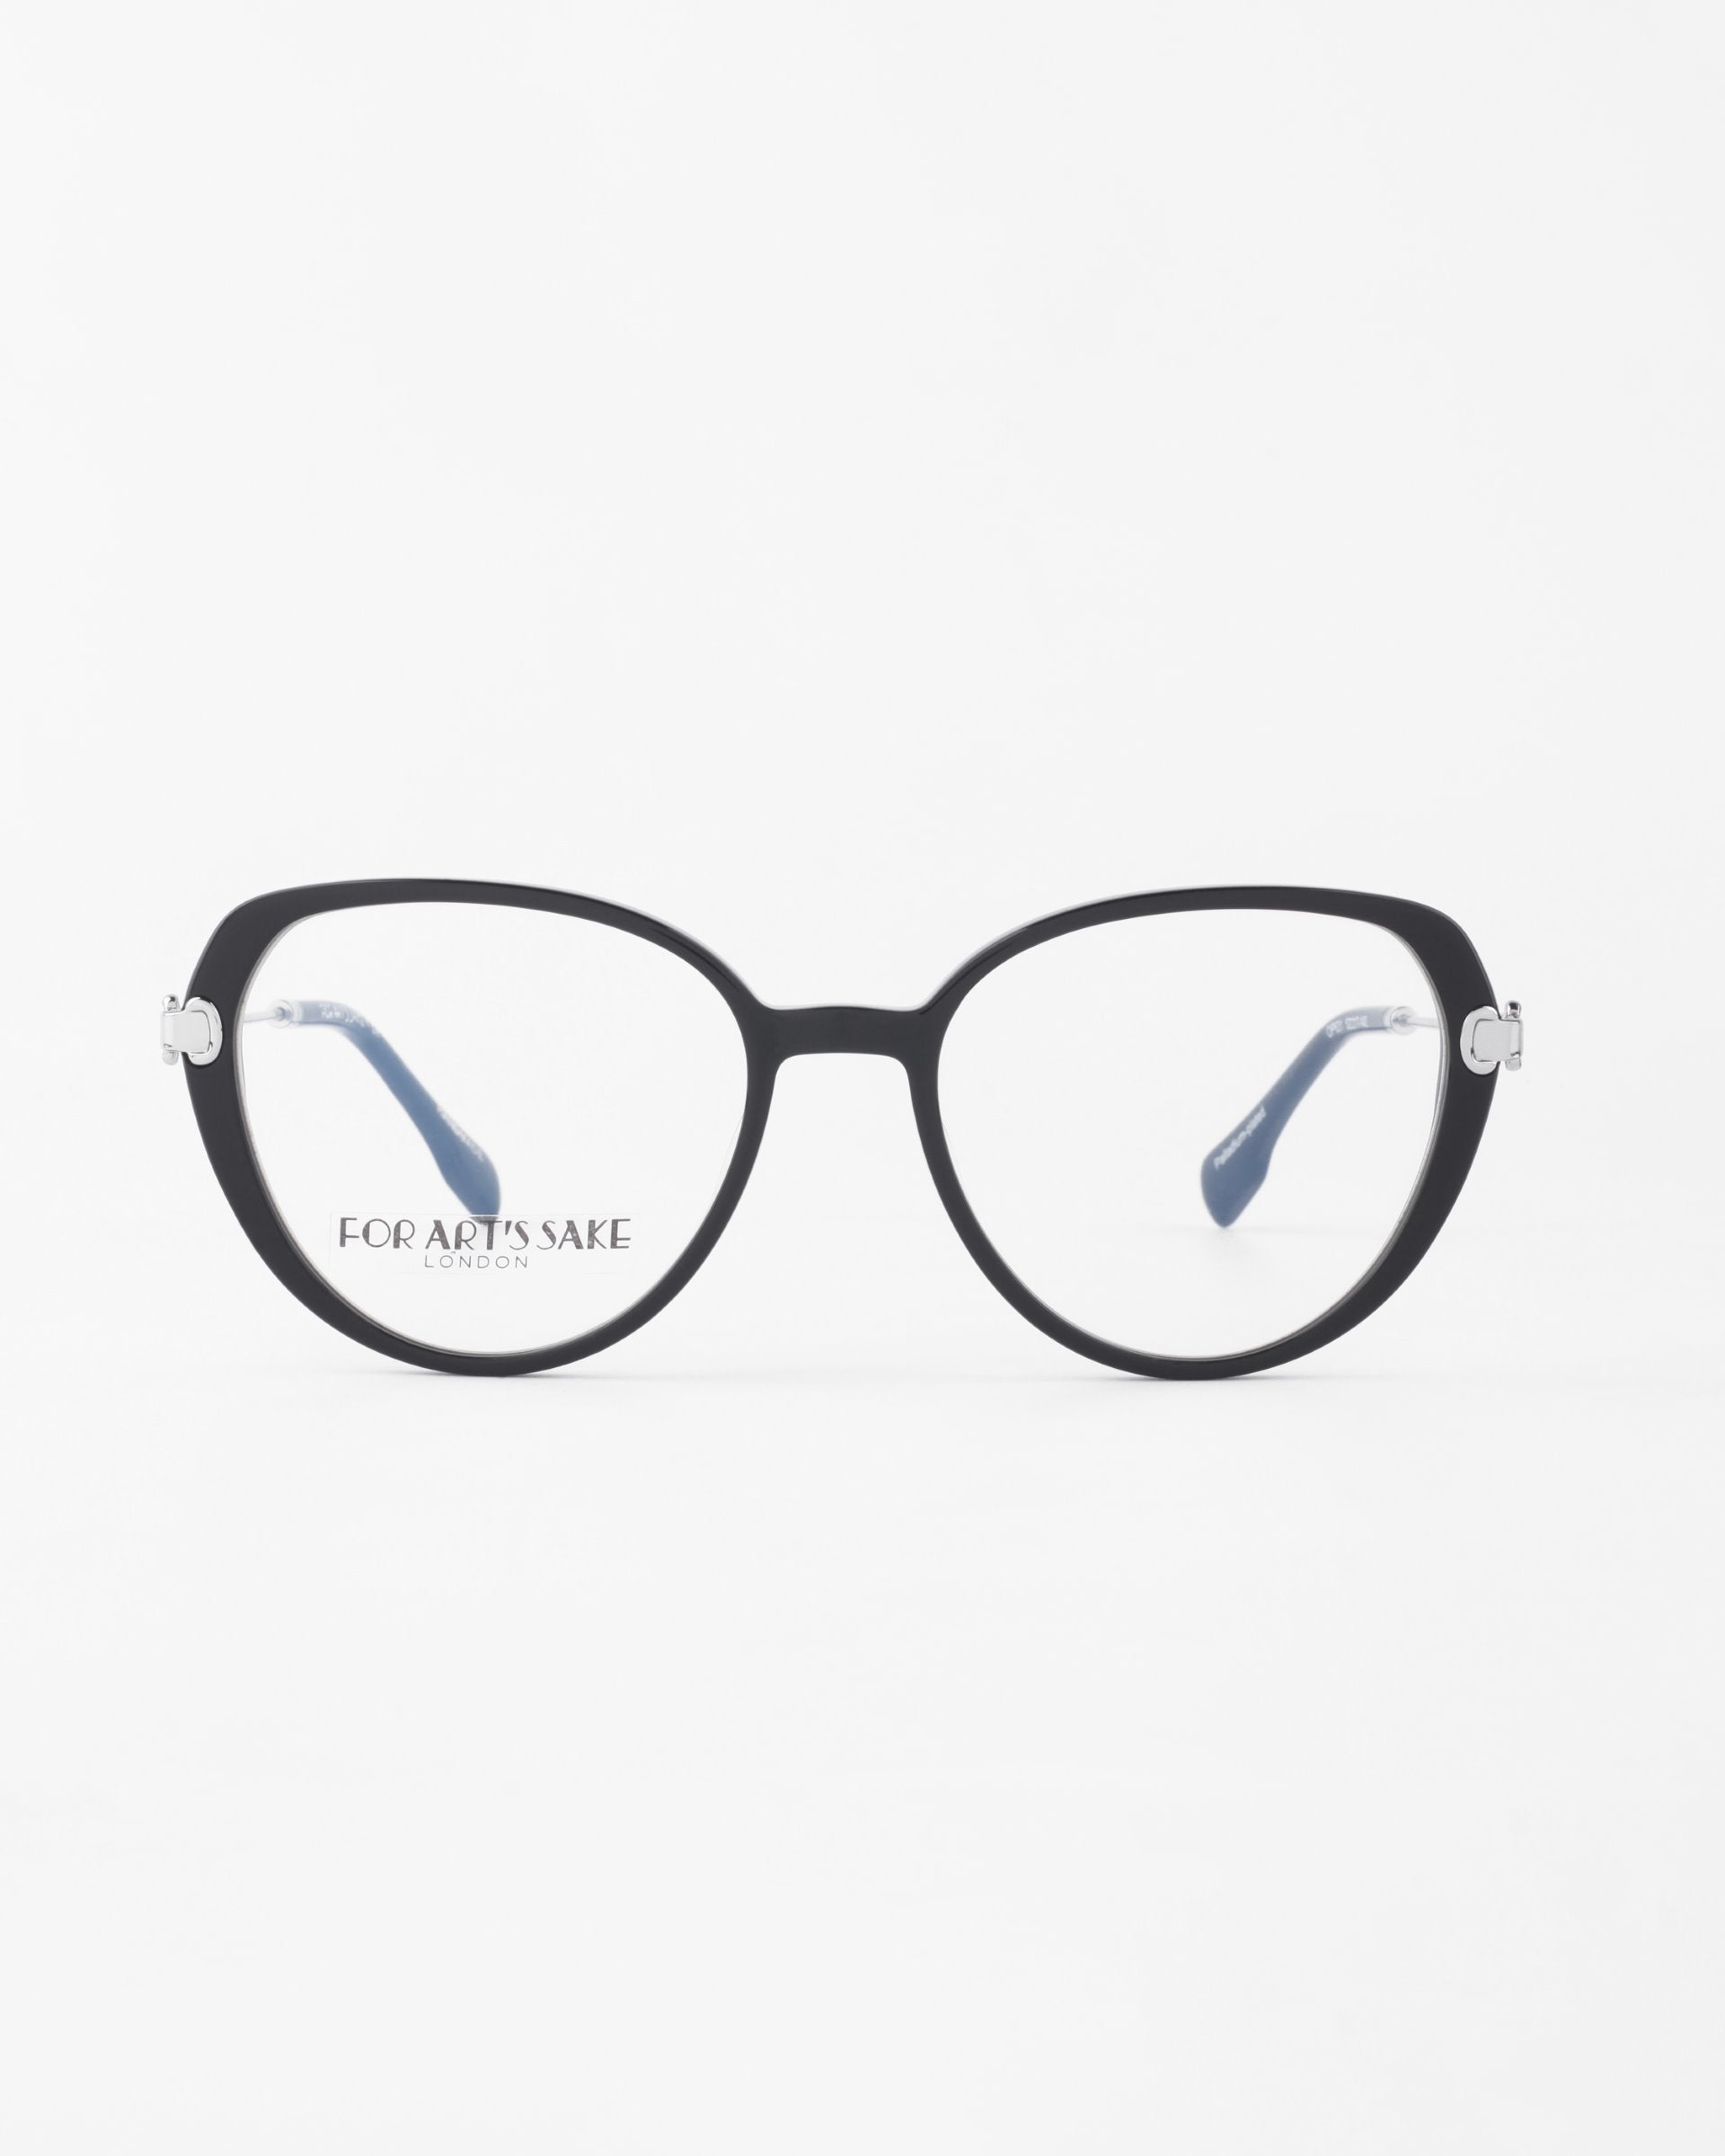 A pair of black-rimmed eyeglasses with a slightly rounded cat-eye shape, featuring the &quot;For Art&#39;s Sake®&quot; logo on the inside of the right lens. The frames have 18-karat gold-plated silver accents at the hinges, and the temples are navy blue with white tips. These eyeglasses are called Waterhouse by For Art&#39;s Sake®.